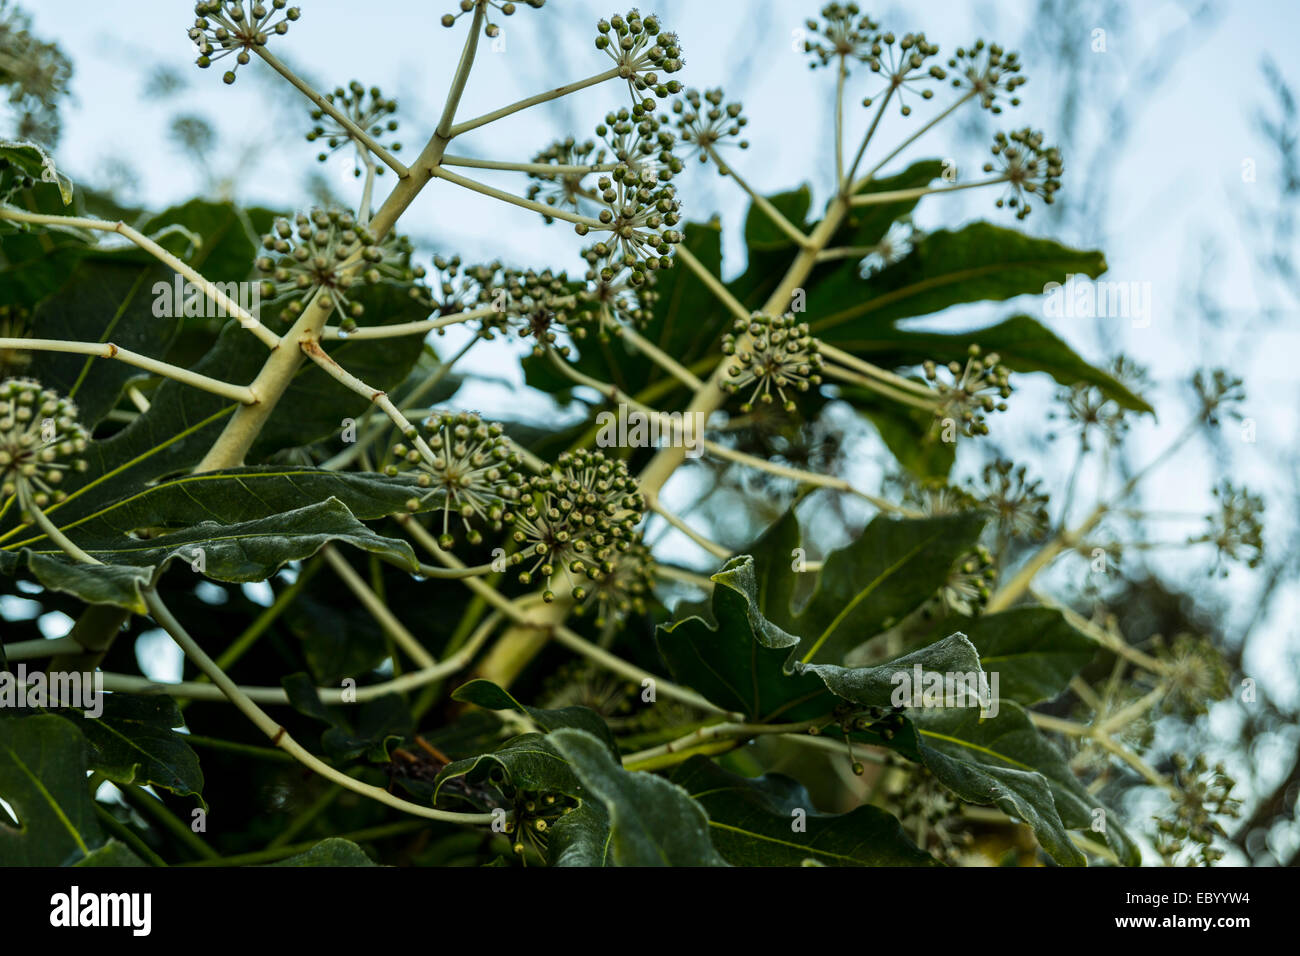 South Norwood, London, UK. 6th December 2014. Uk Weather. A morning frost covering a Japanese aralia on a chilly winter day Credit:  Cecilia Colussi/Alamy Live News Stock Photo